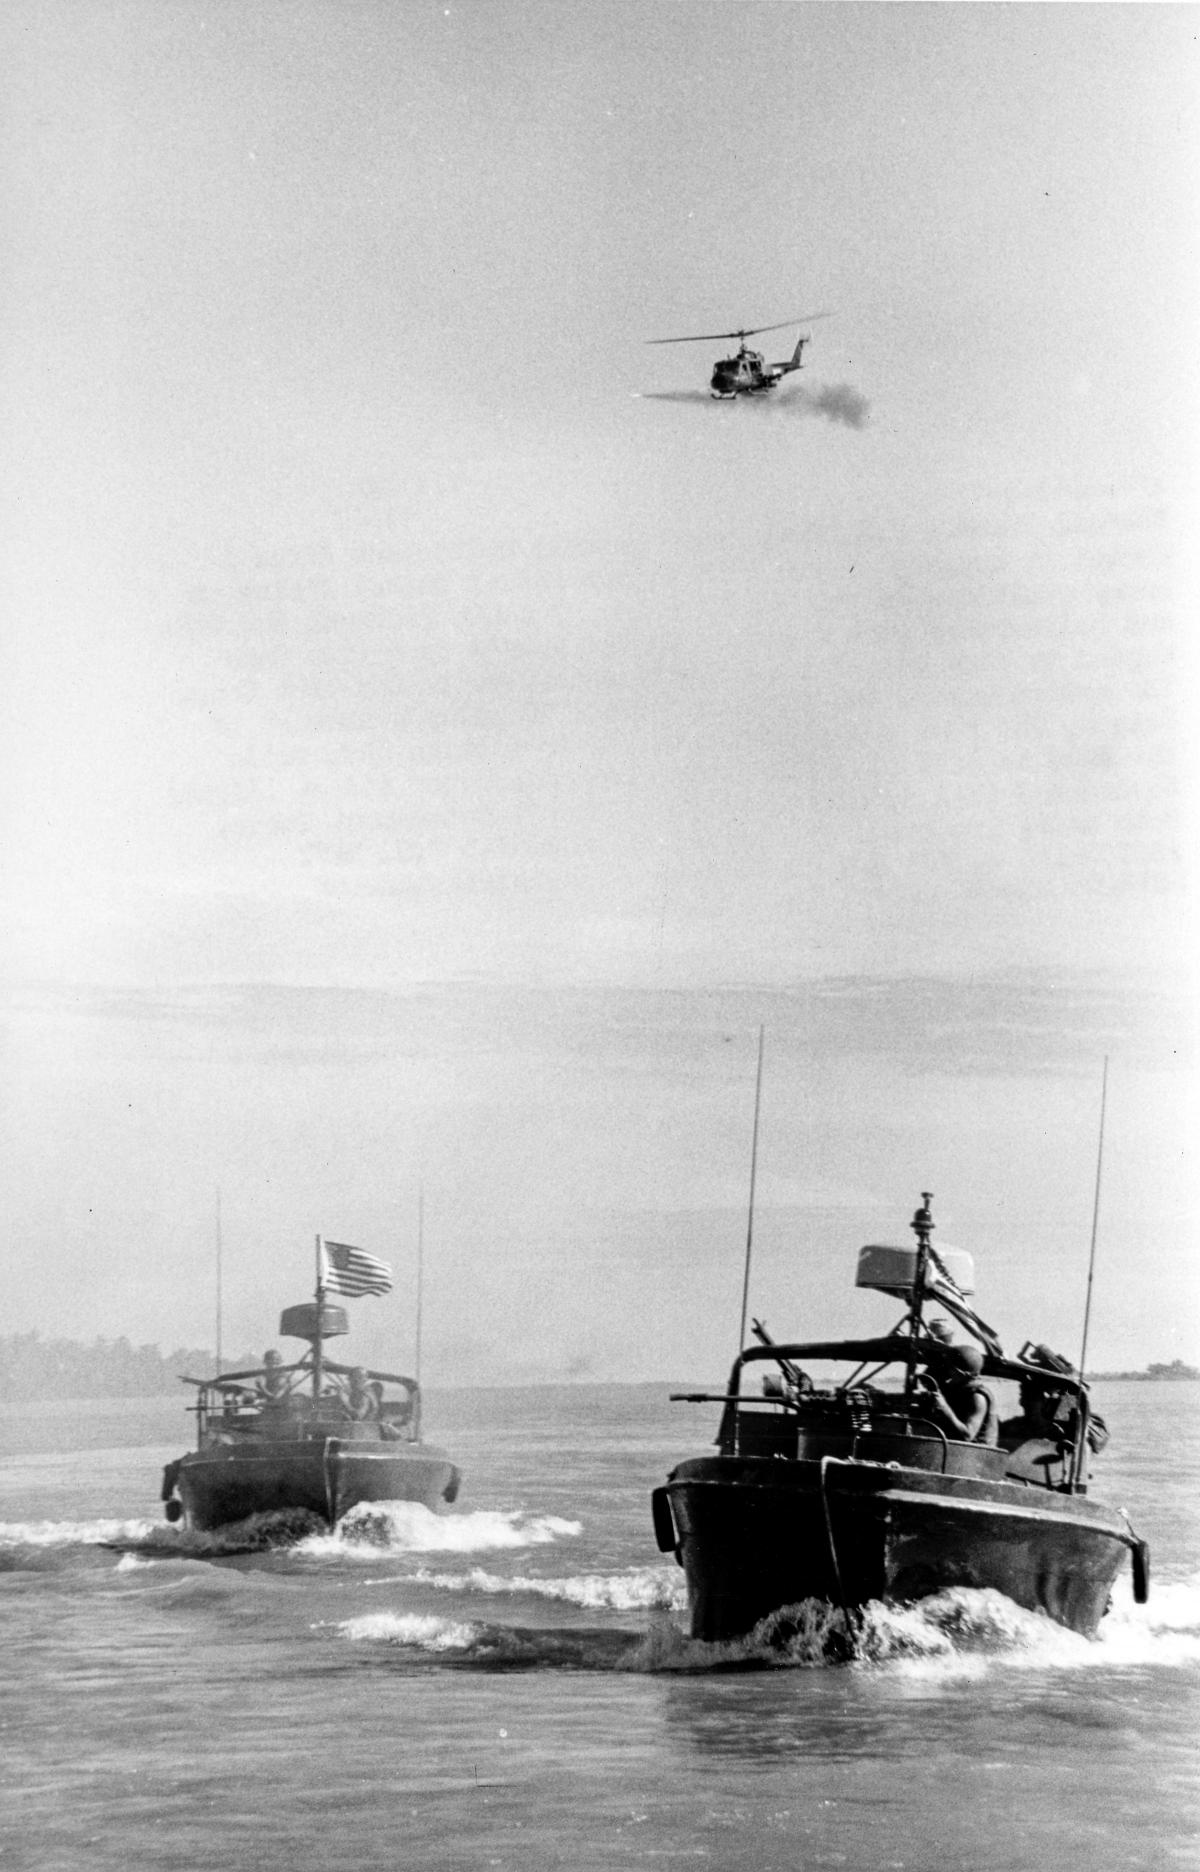 U.S. Navy armed gunship helicopter fires a rocket in support of two PBRs (River Patrol Boats)